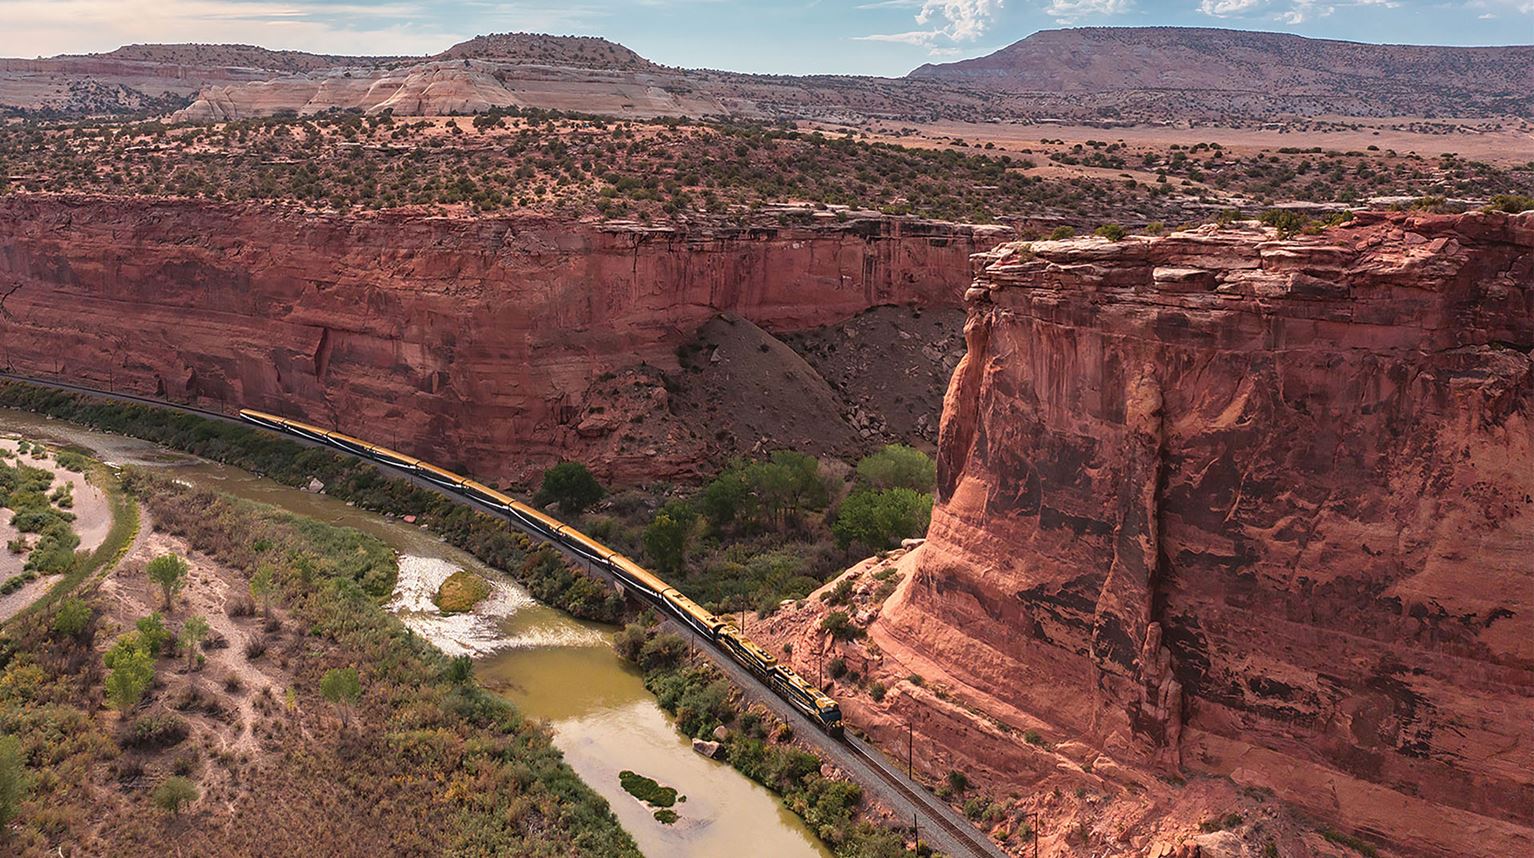 Rocky Mountaineer train in a rustic rugged landscape in Ruby Canyon, Colorado/Utah Border